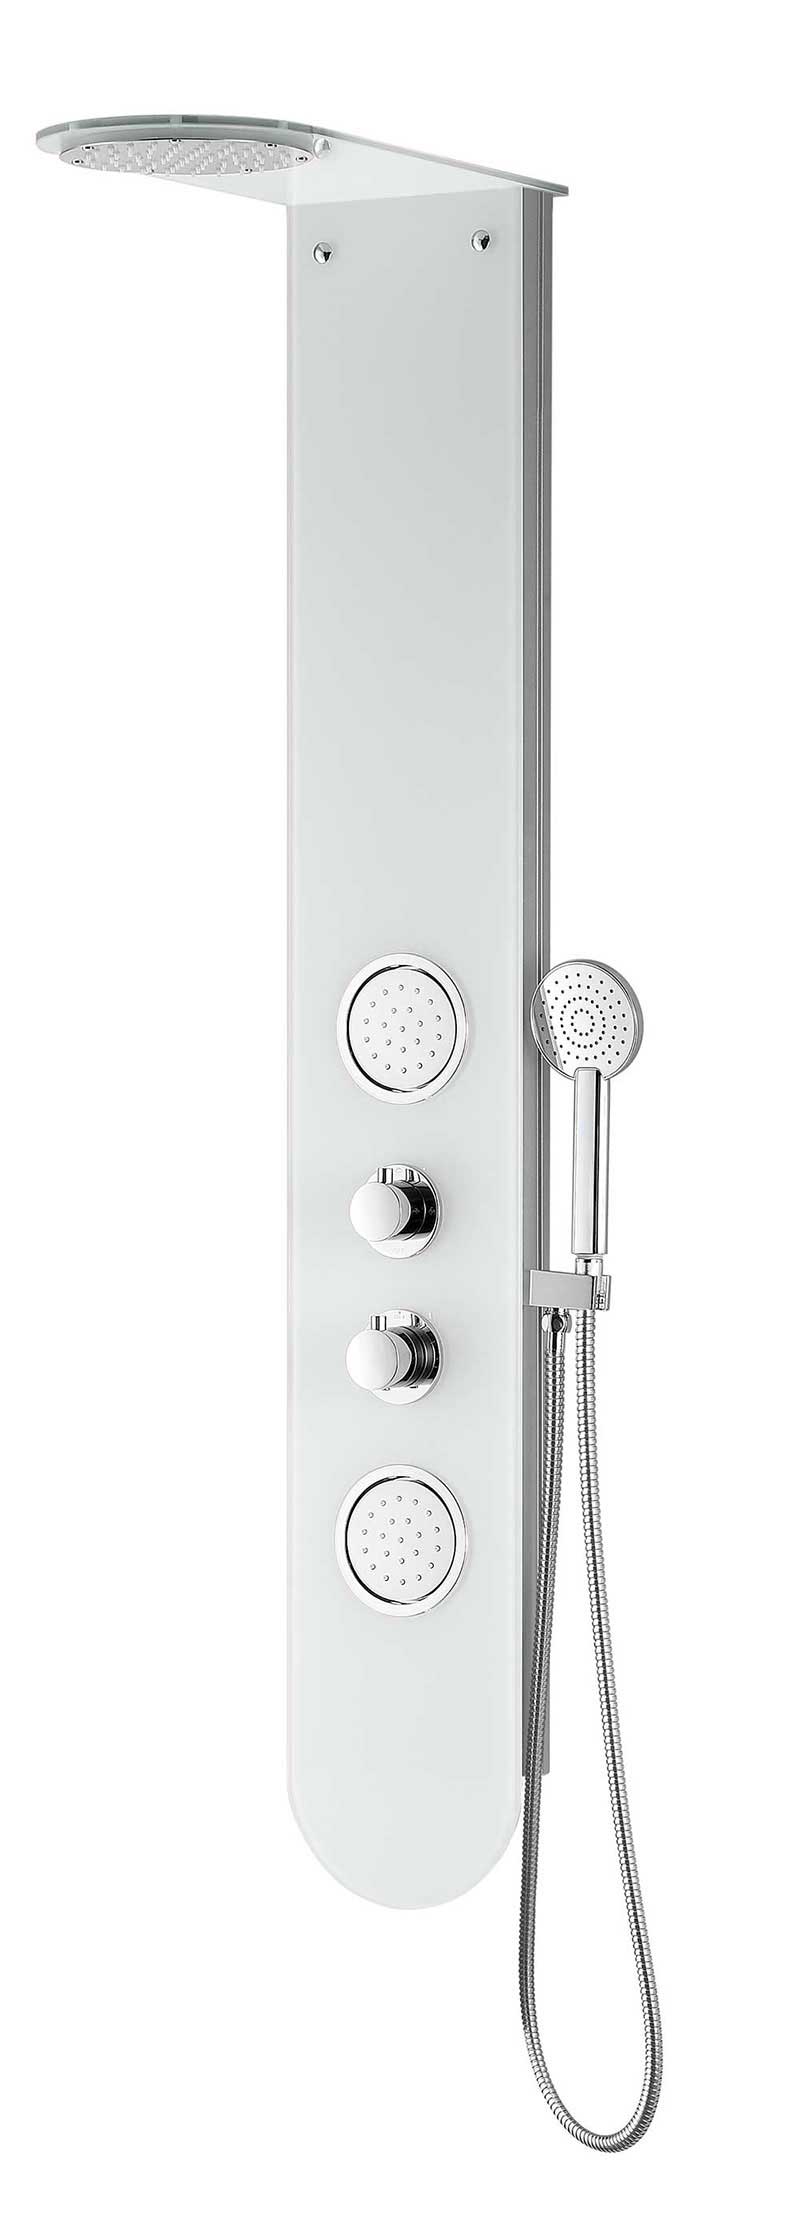 Anzzi PLAINS Series 56 in. Full Body Shower Panel System with Heavy Rain Shower and Spray Wand in White